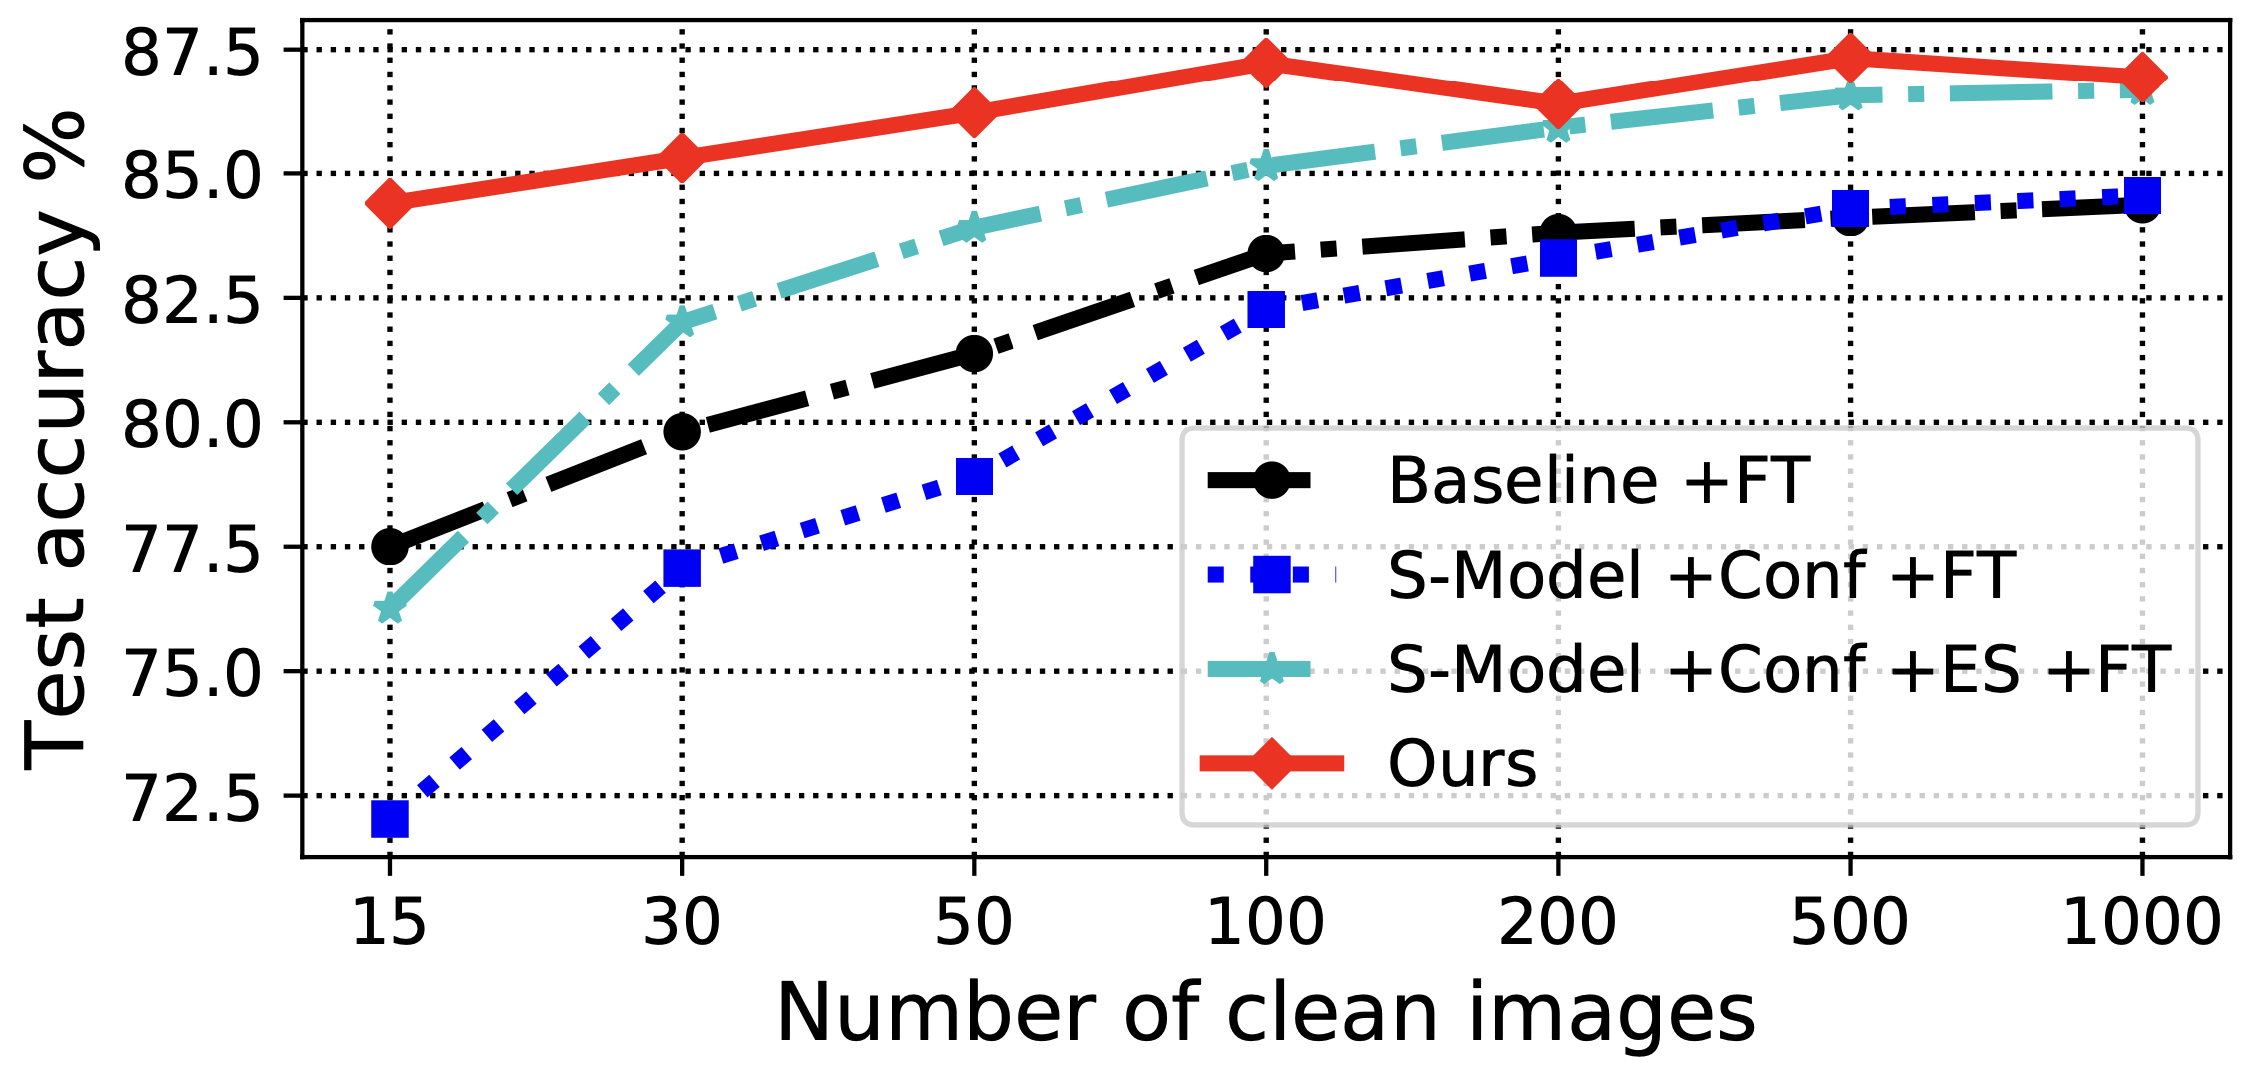 Effect of the number of clean imaged used, on CIFAR-10 with 40% of data flipped to label 3. “ES” denotes early stopping.